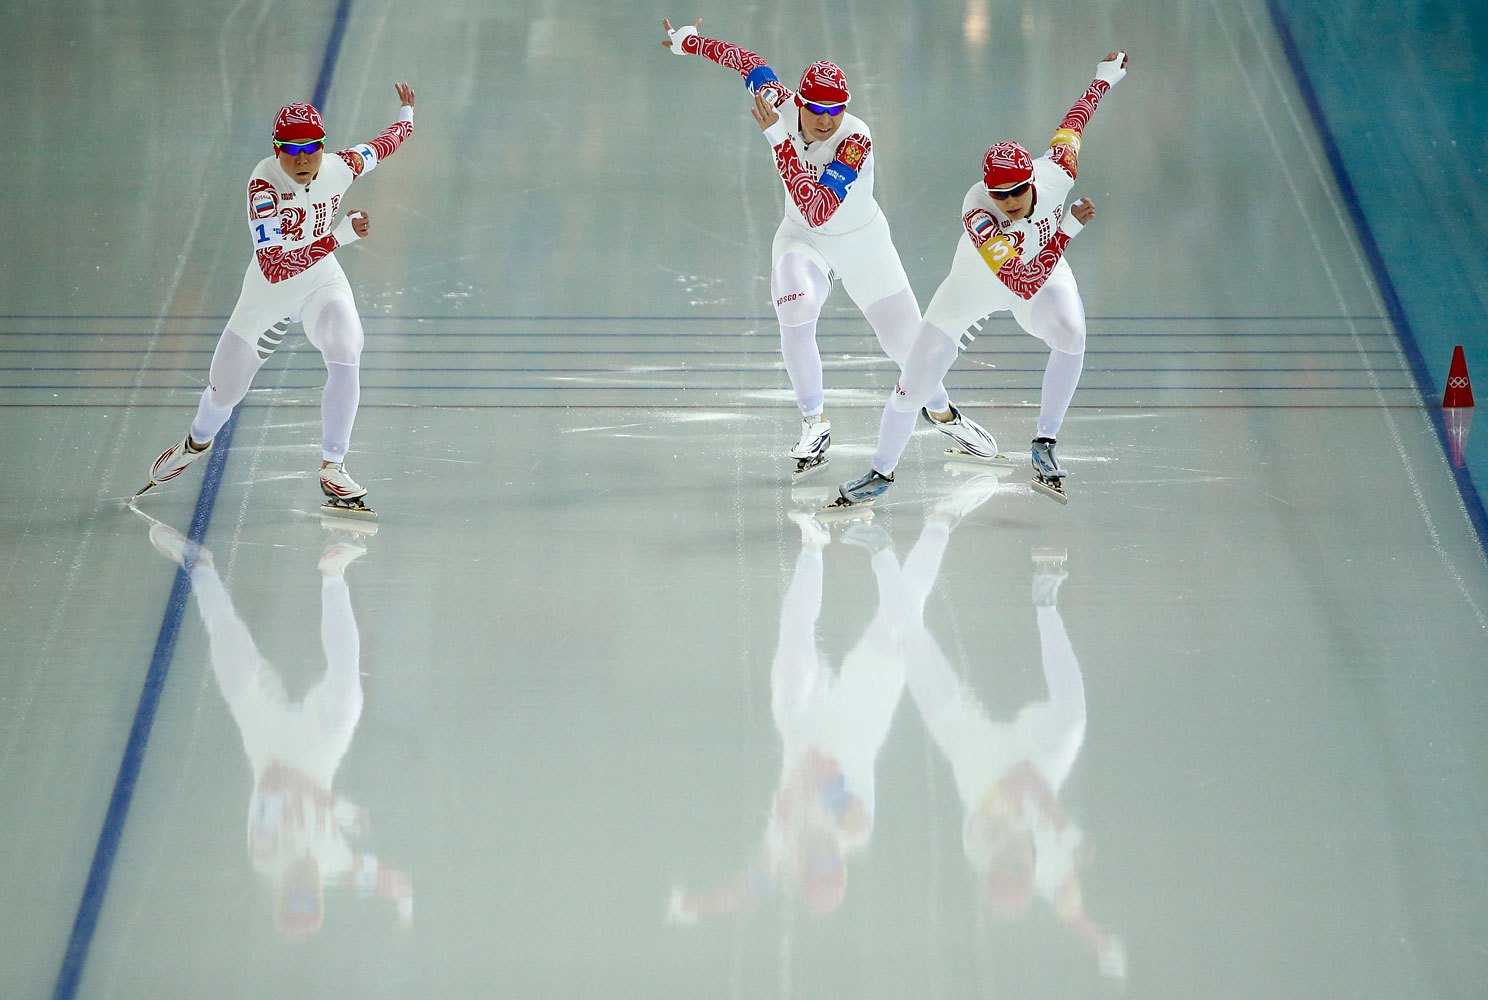 Speedskaters from Russia, left to right, Olga Graf, Yulia Skokova and Yekaterina Shikhova compete in the women's speedskating team pursuit semifinals.